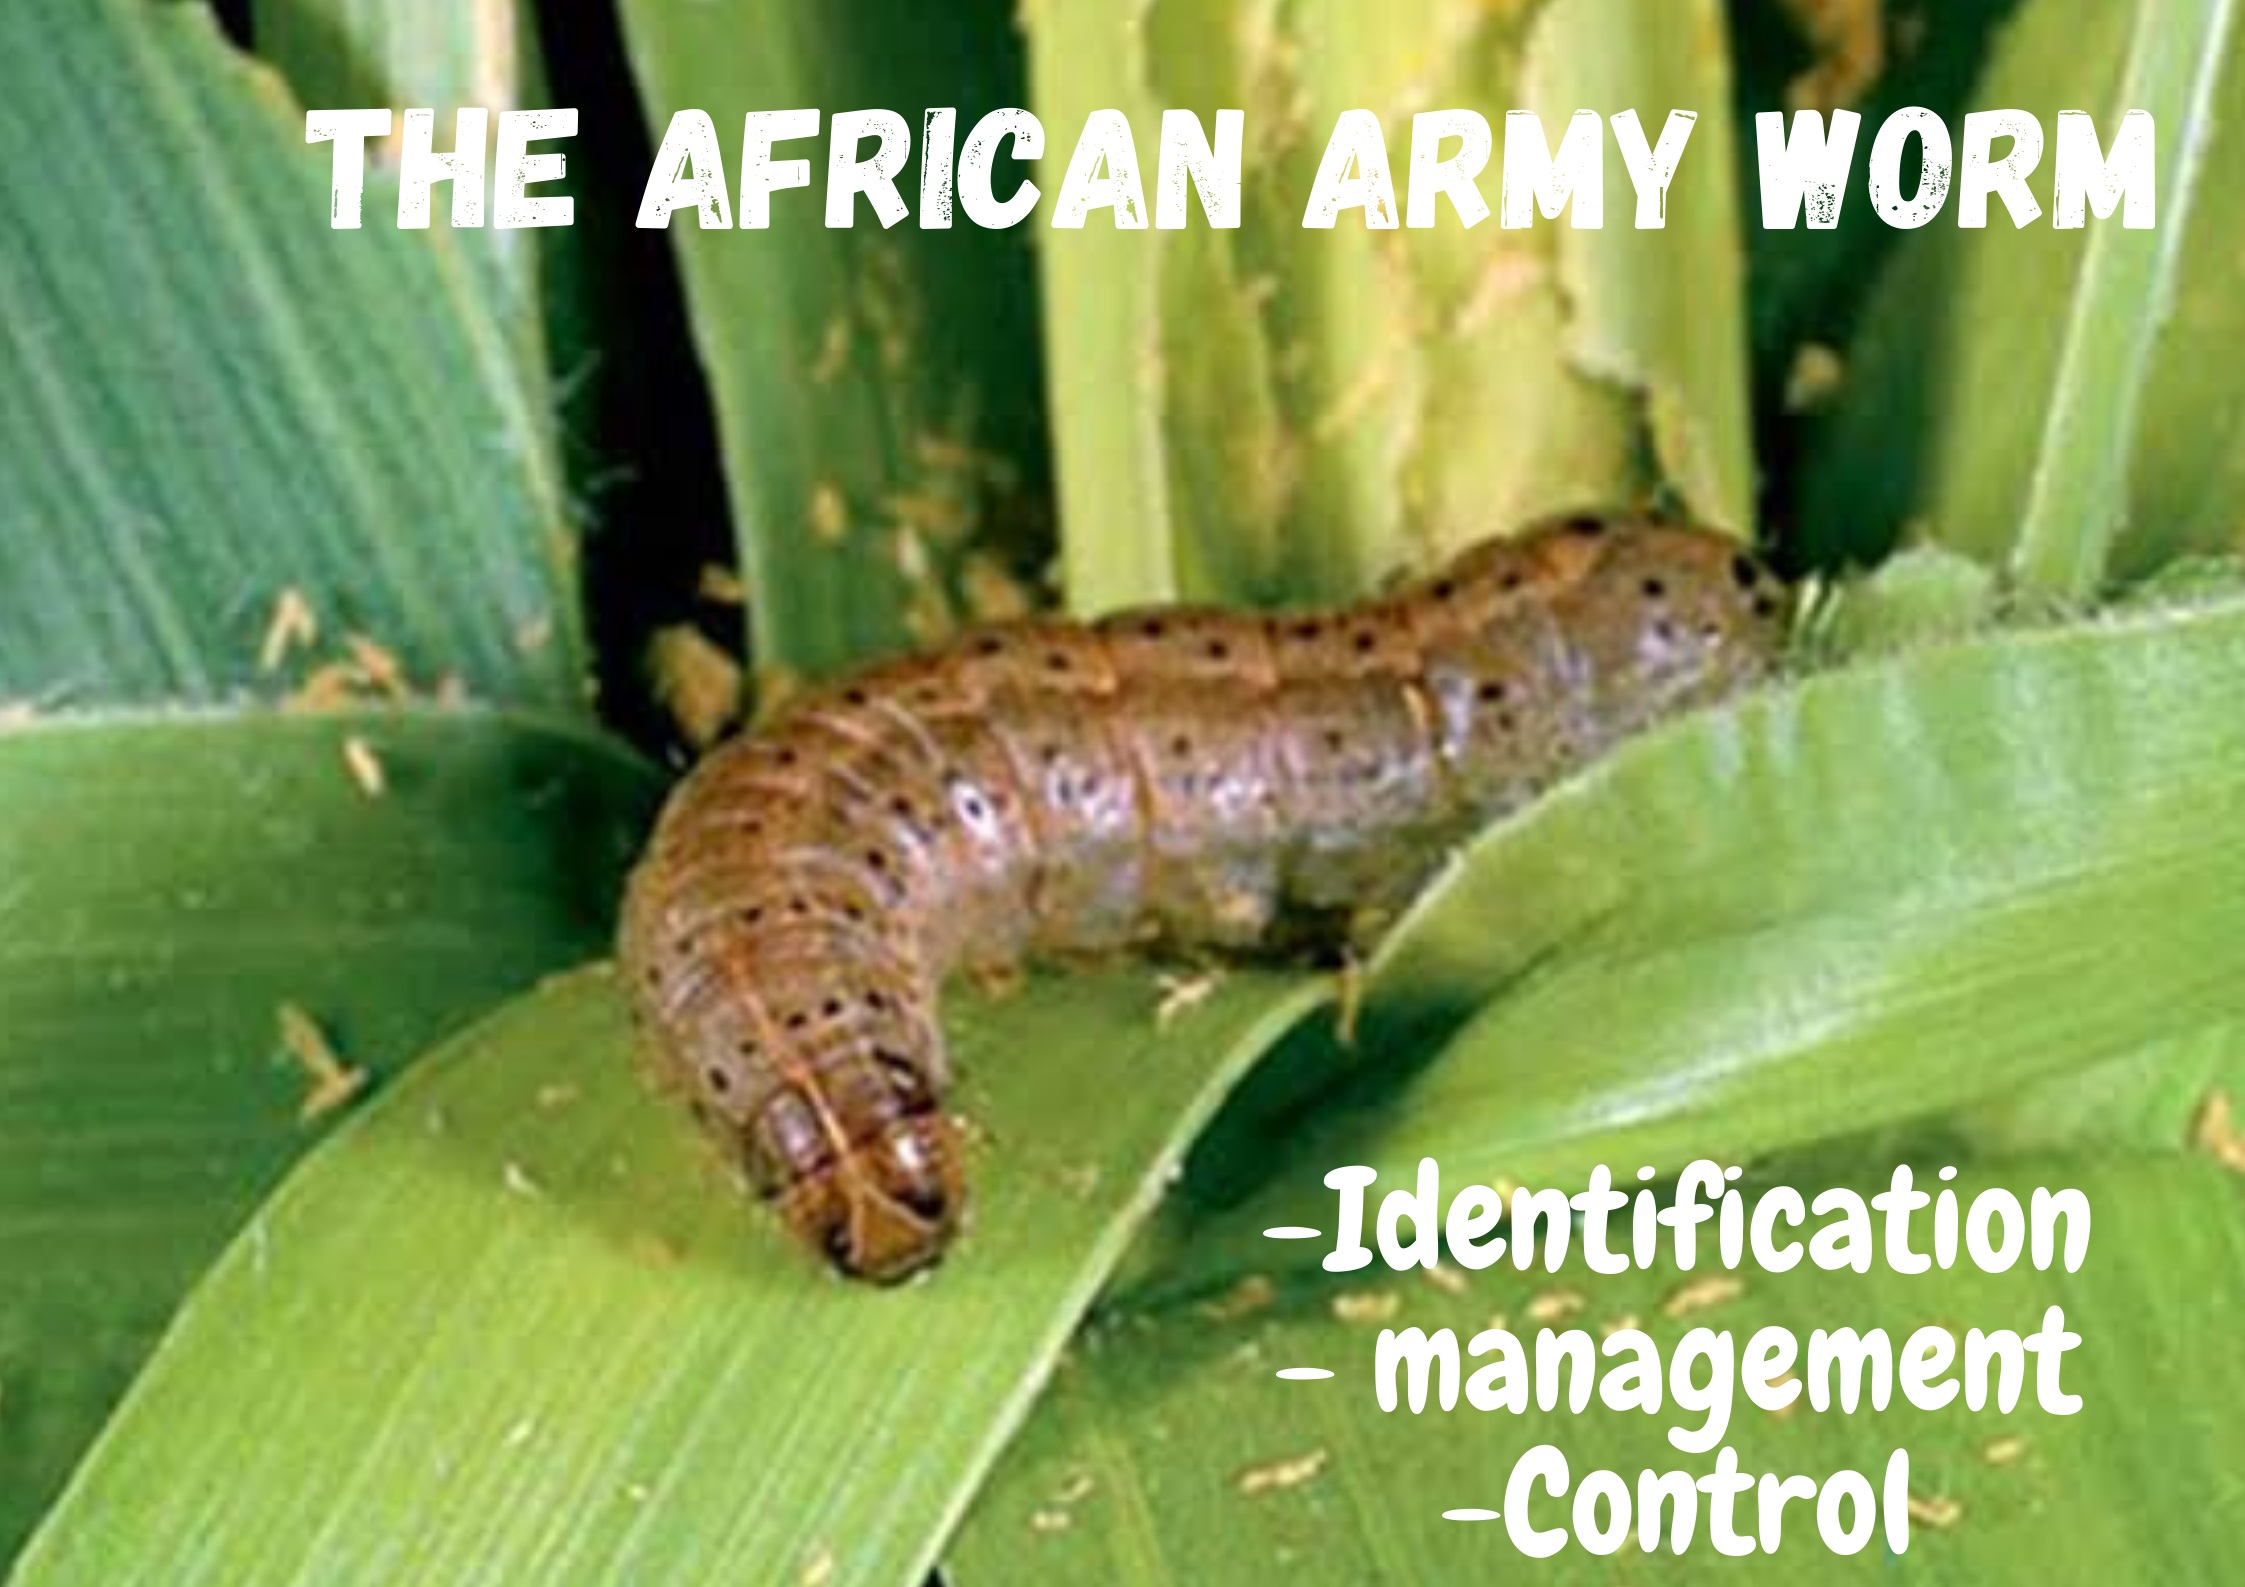 WHAT YOU NEED TO KNOW ABOUT THE RECENT AFRICAN ARMY WORM (ARMY WORM) OUTBREAK IN UGANDA!